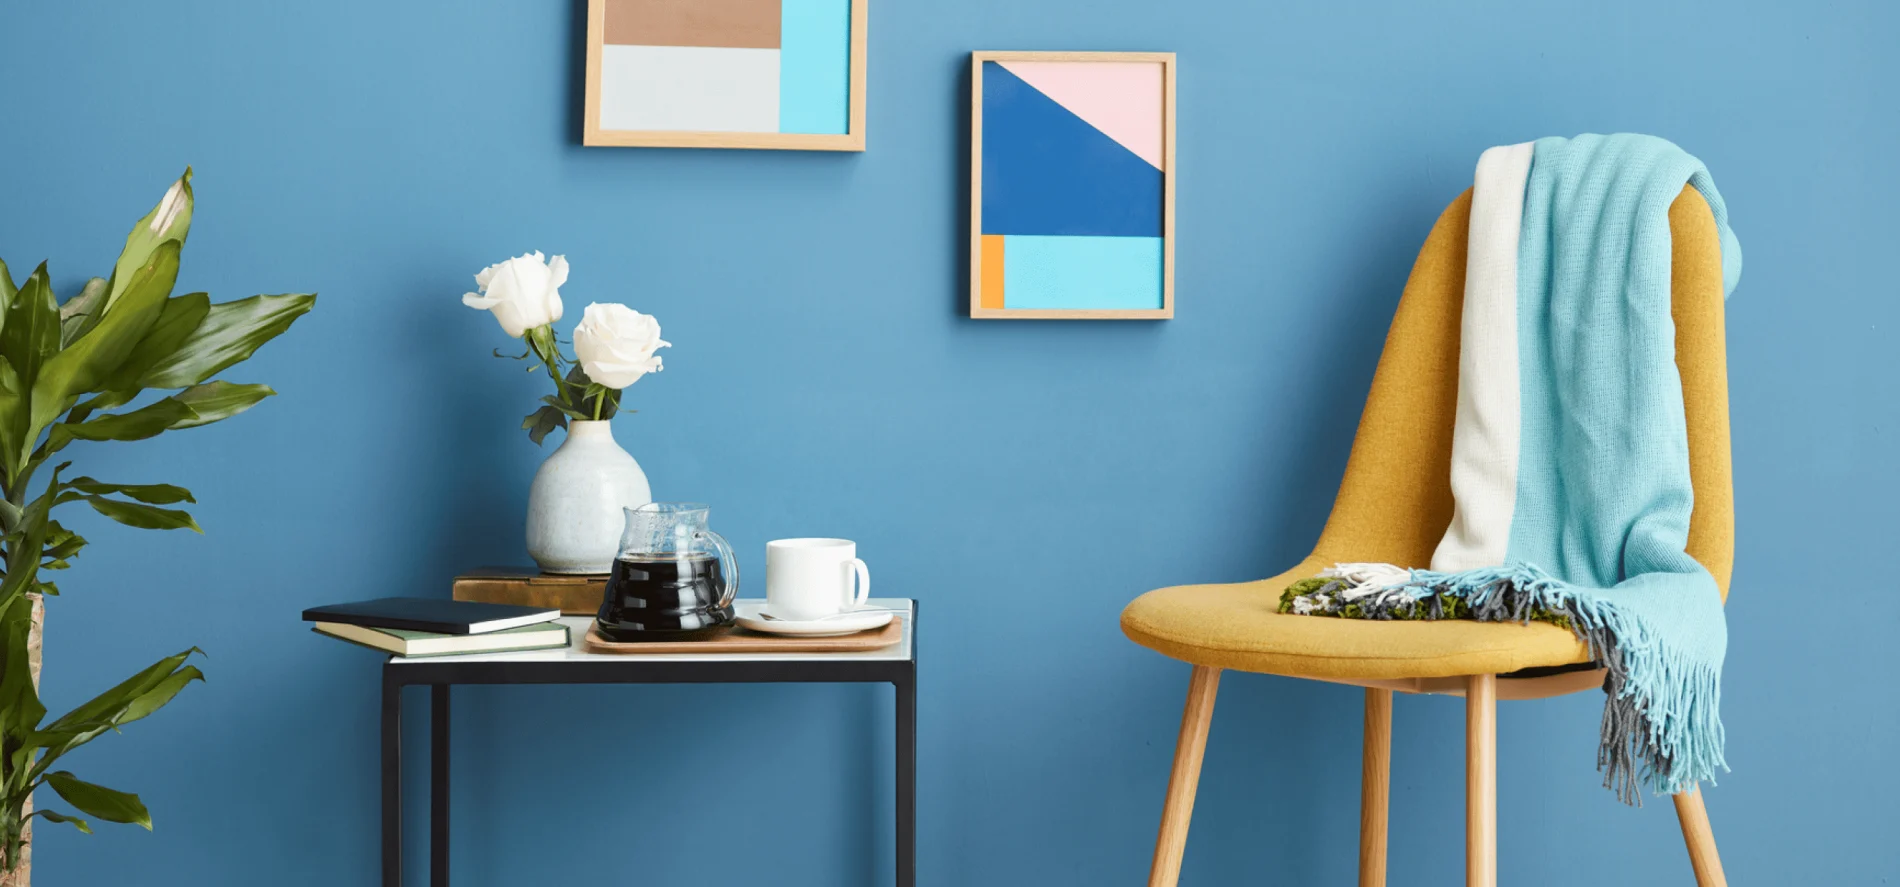 image of an end table with coffee and flower vase with a chair and plant on either side